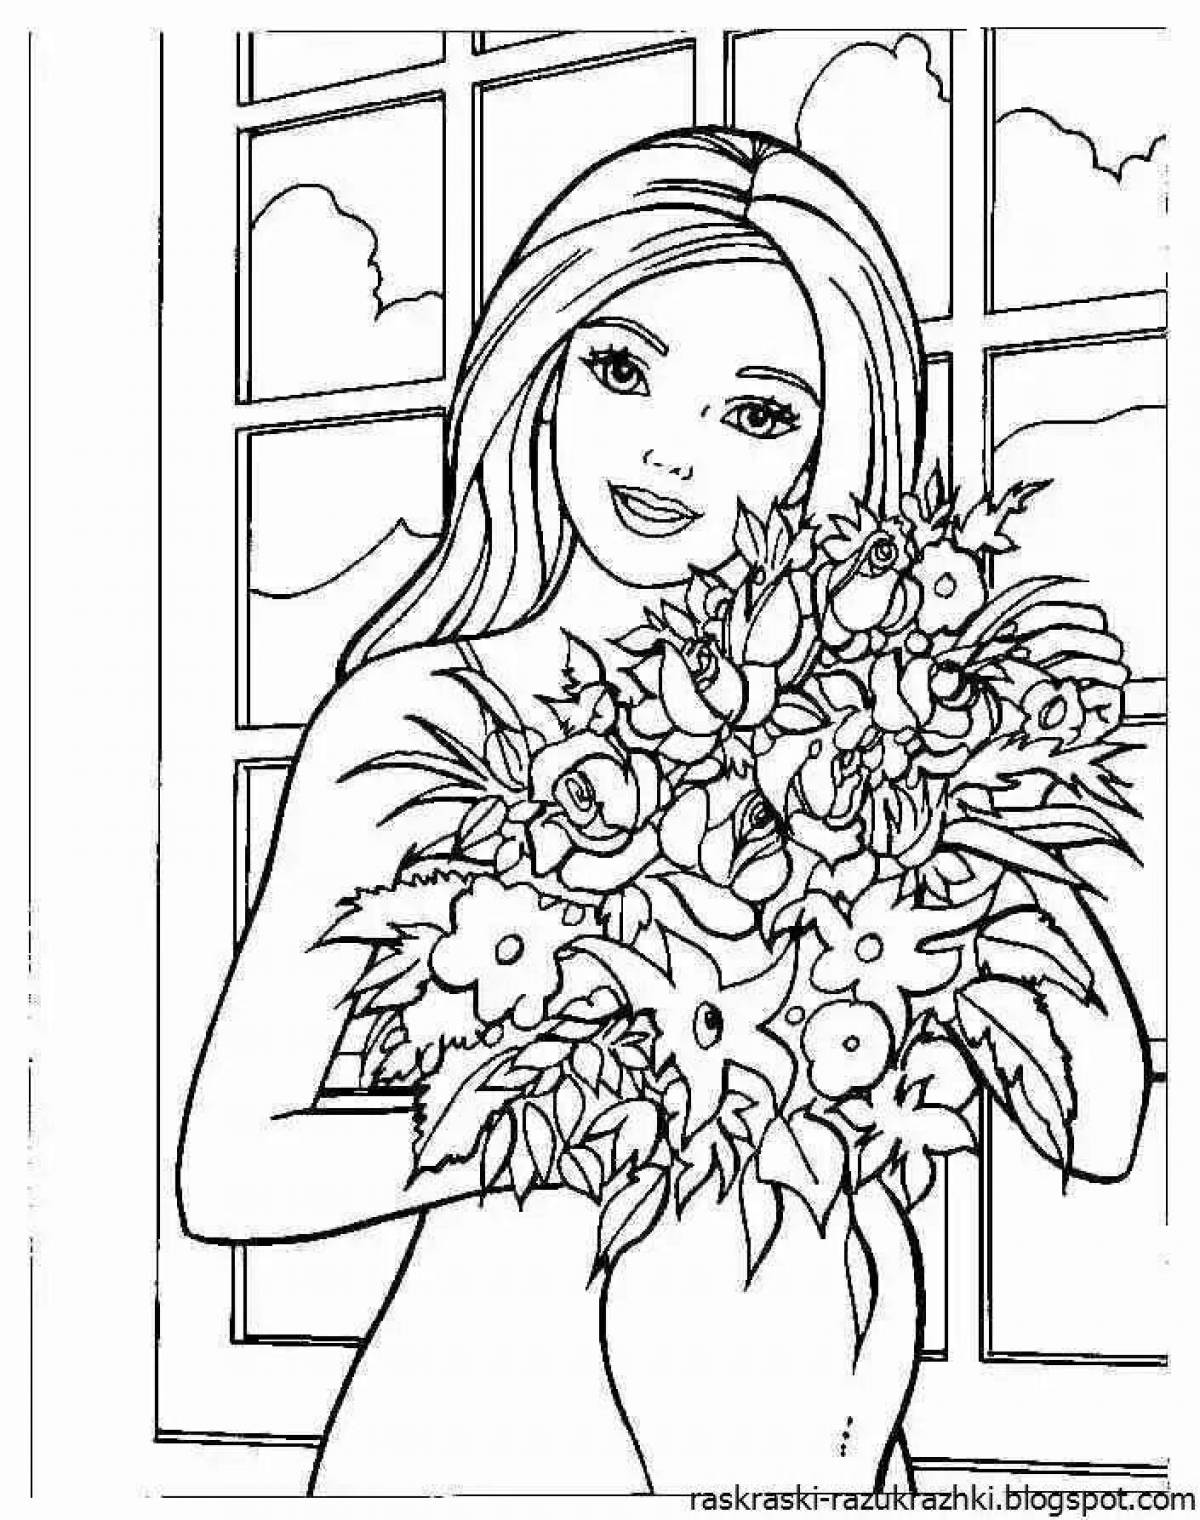 Glitter coloring book for girls is the best in the world